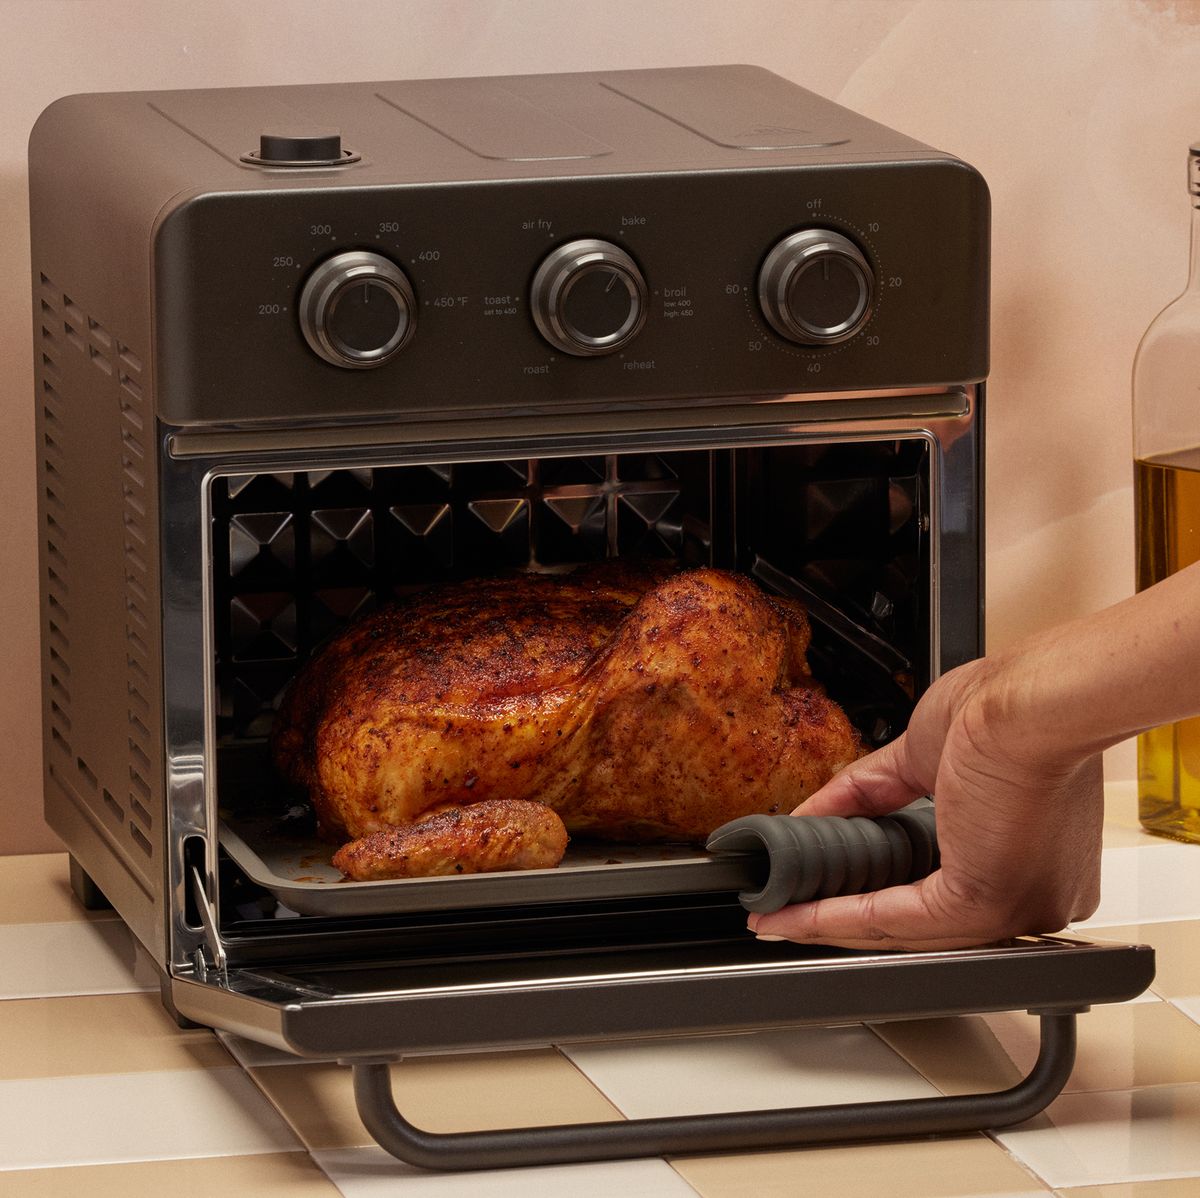 Our Place Wonder Oven Air Fryer Toaster Oven Launch